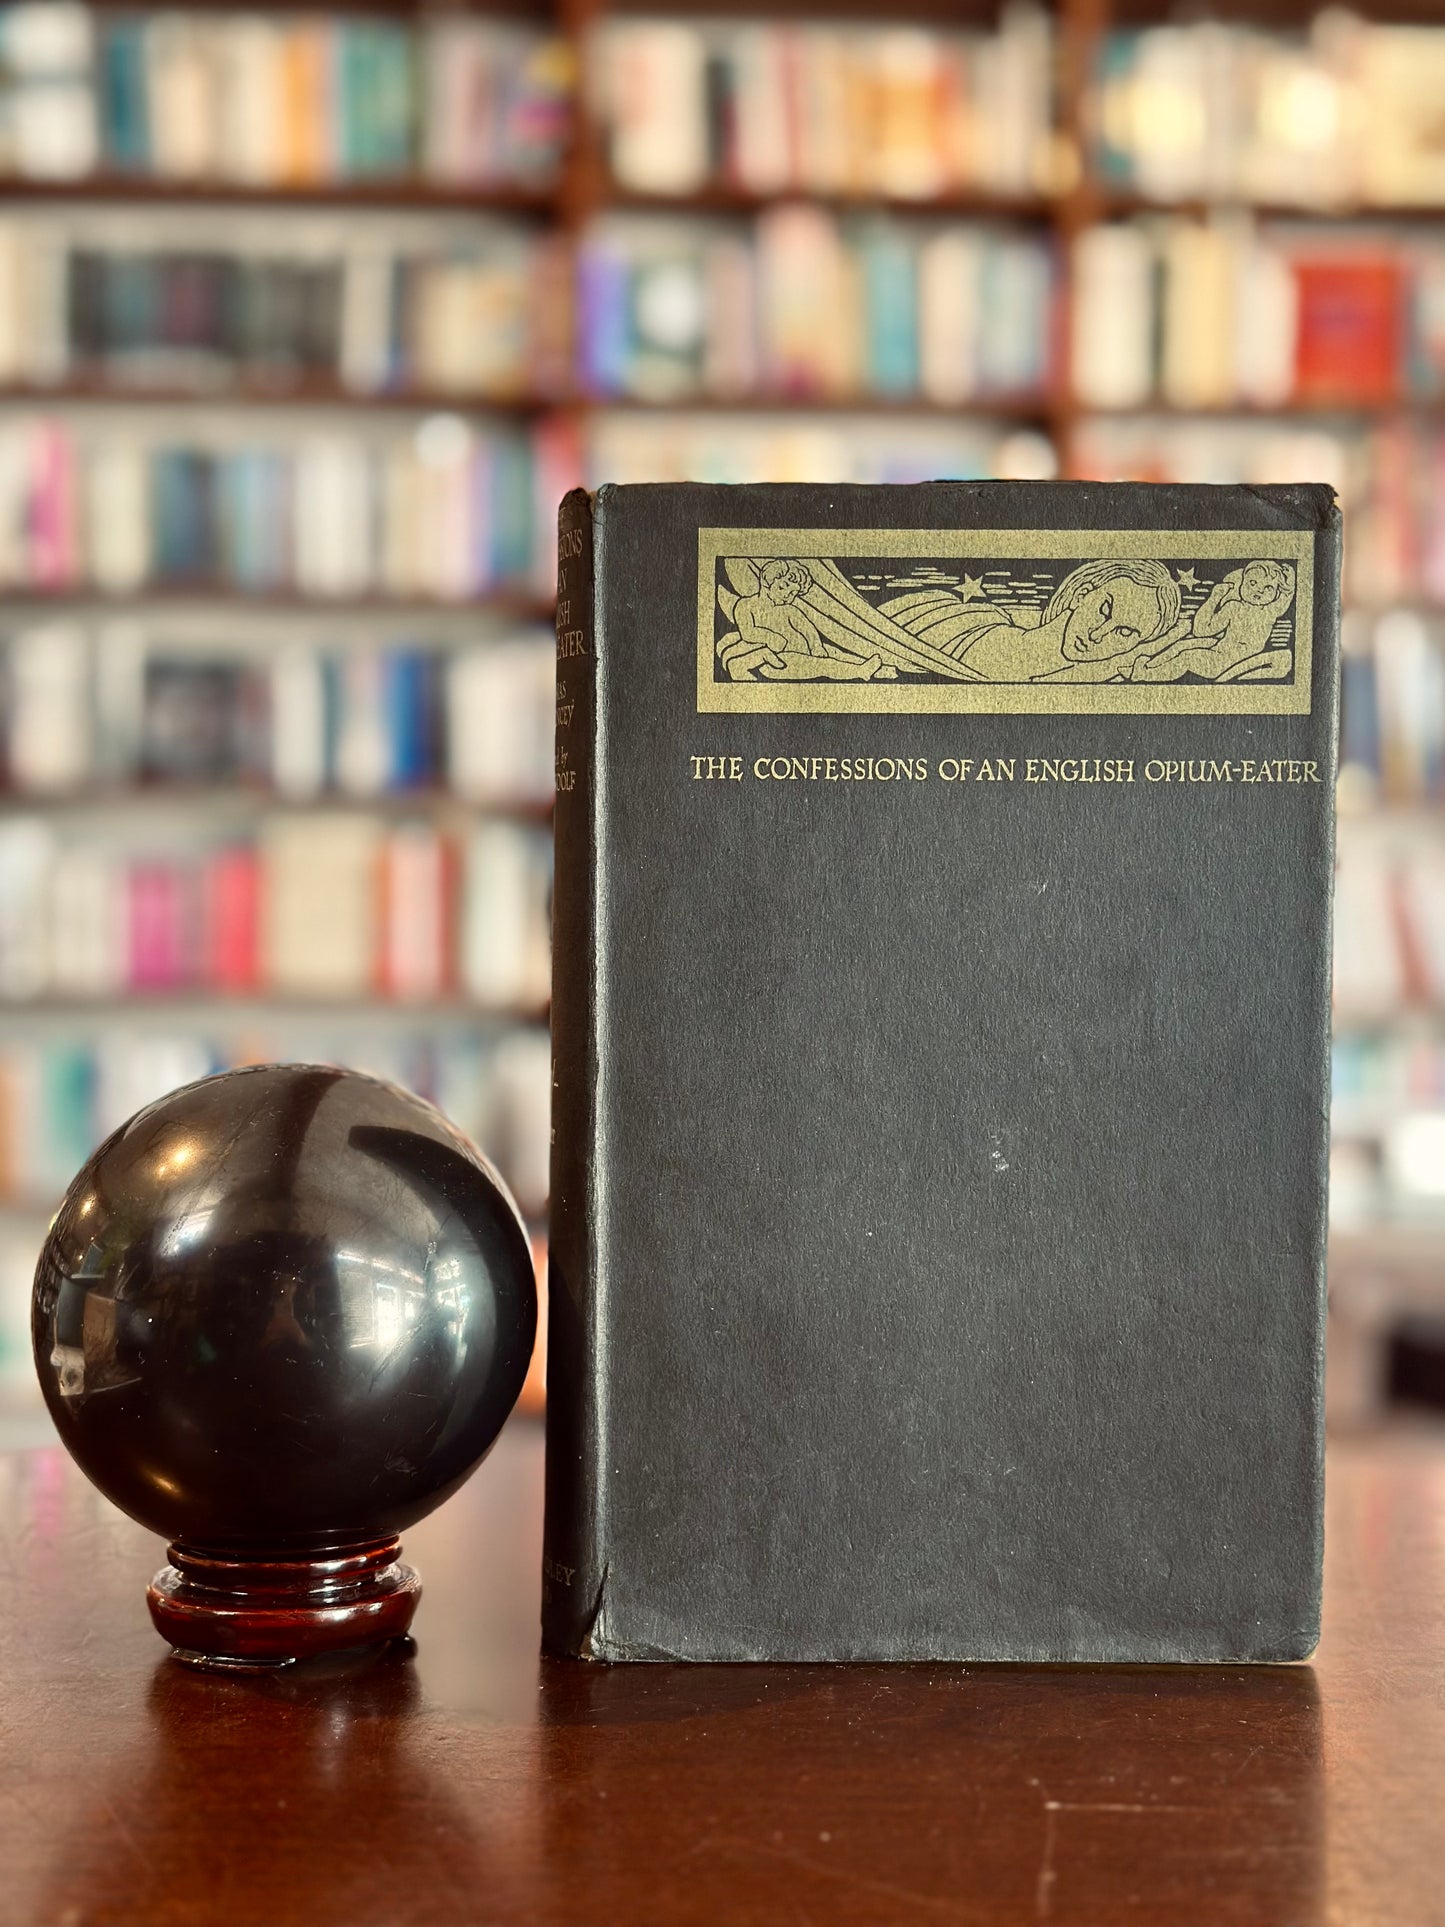 The Confessions of An English Opium Eater by Thomas De Quincey (illustrated)